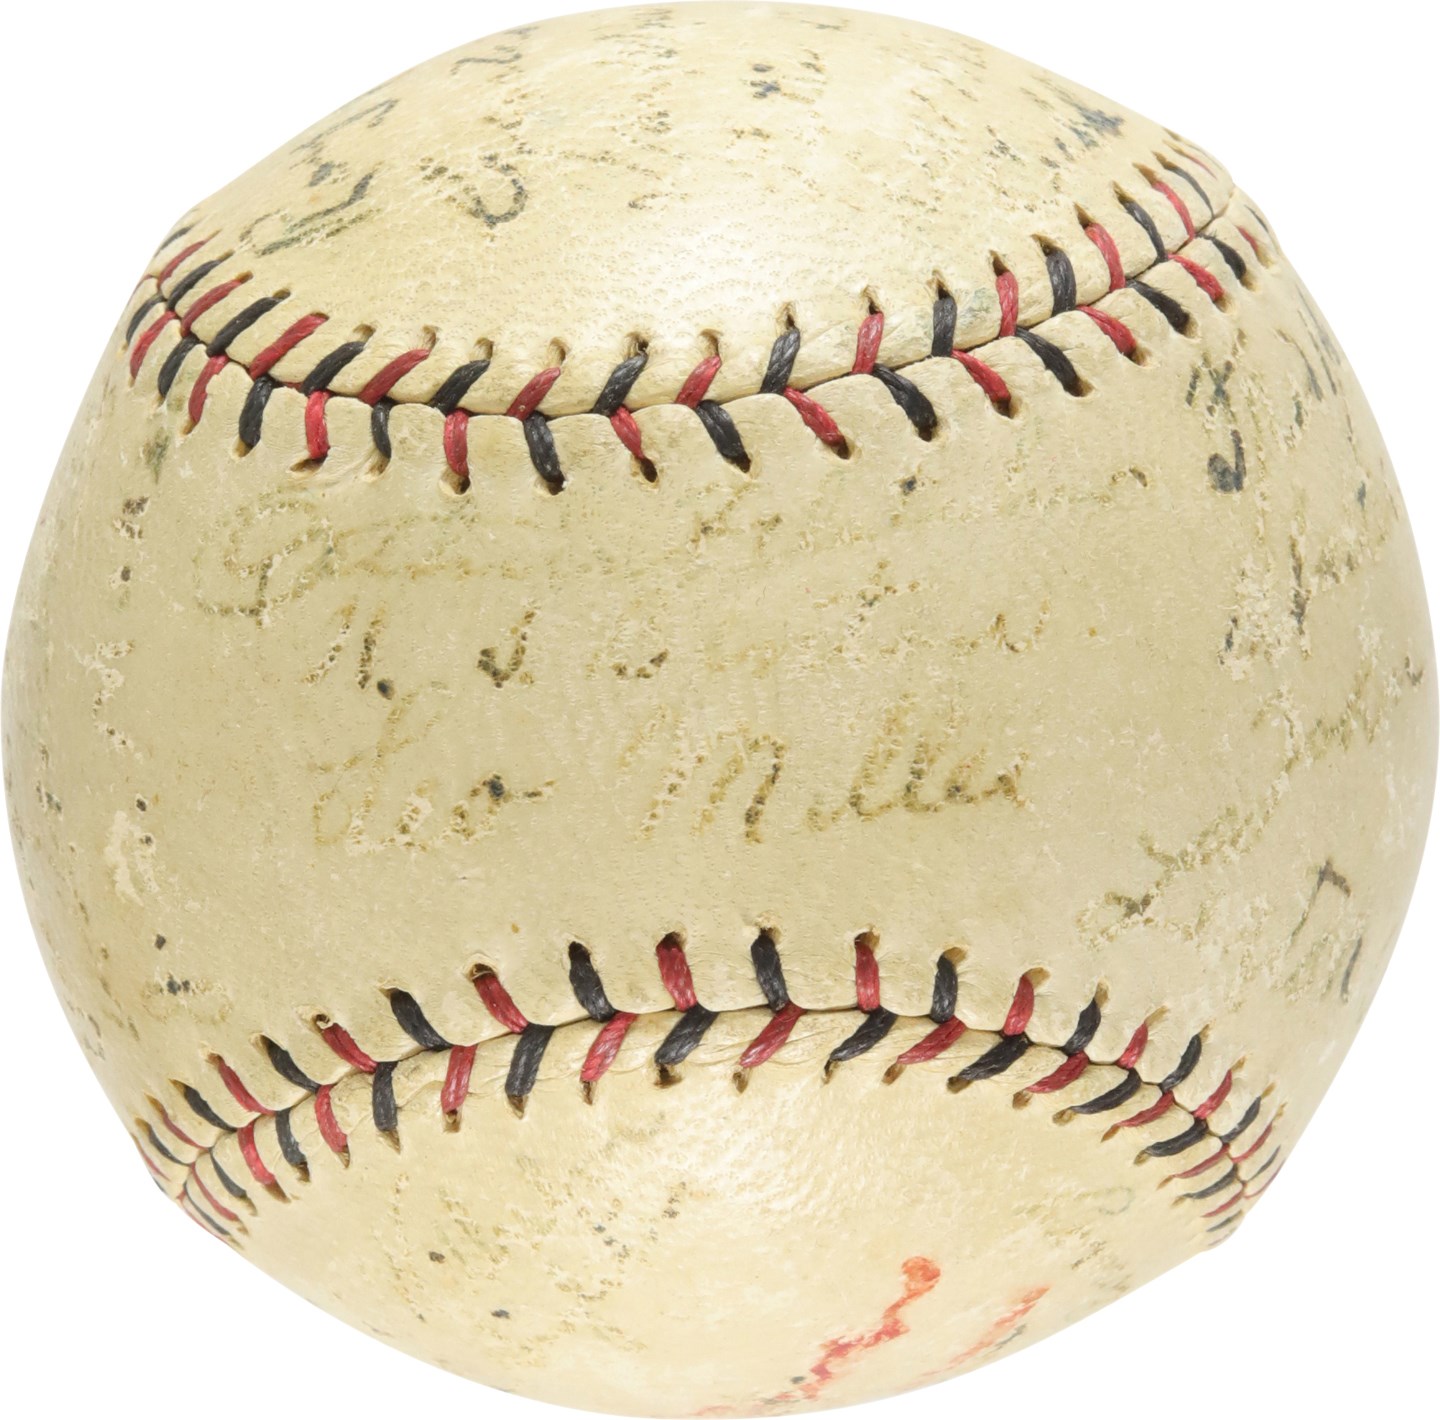 1922 Philadelphia Phillies Team-Signed Baseball (ex-Jimmy Ring Collection)